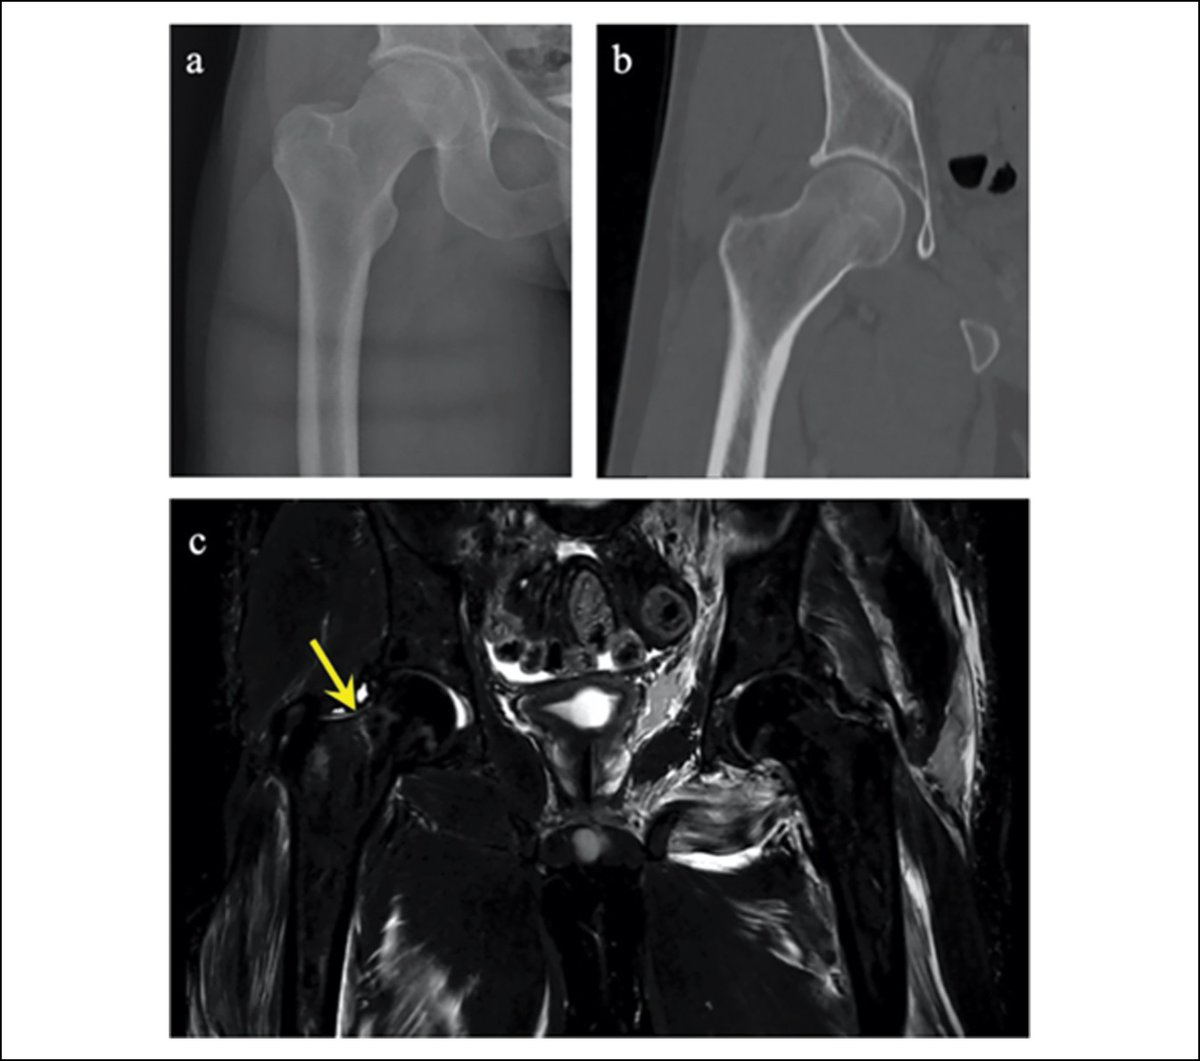 Managing high energy mechanism femoral neck fractures in young patients, read more HERE bit.ly/3TsW9MI from @UABortho